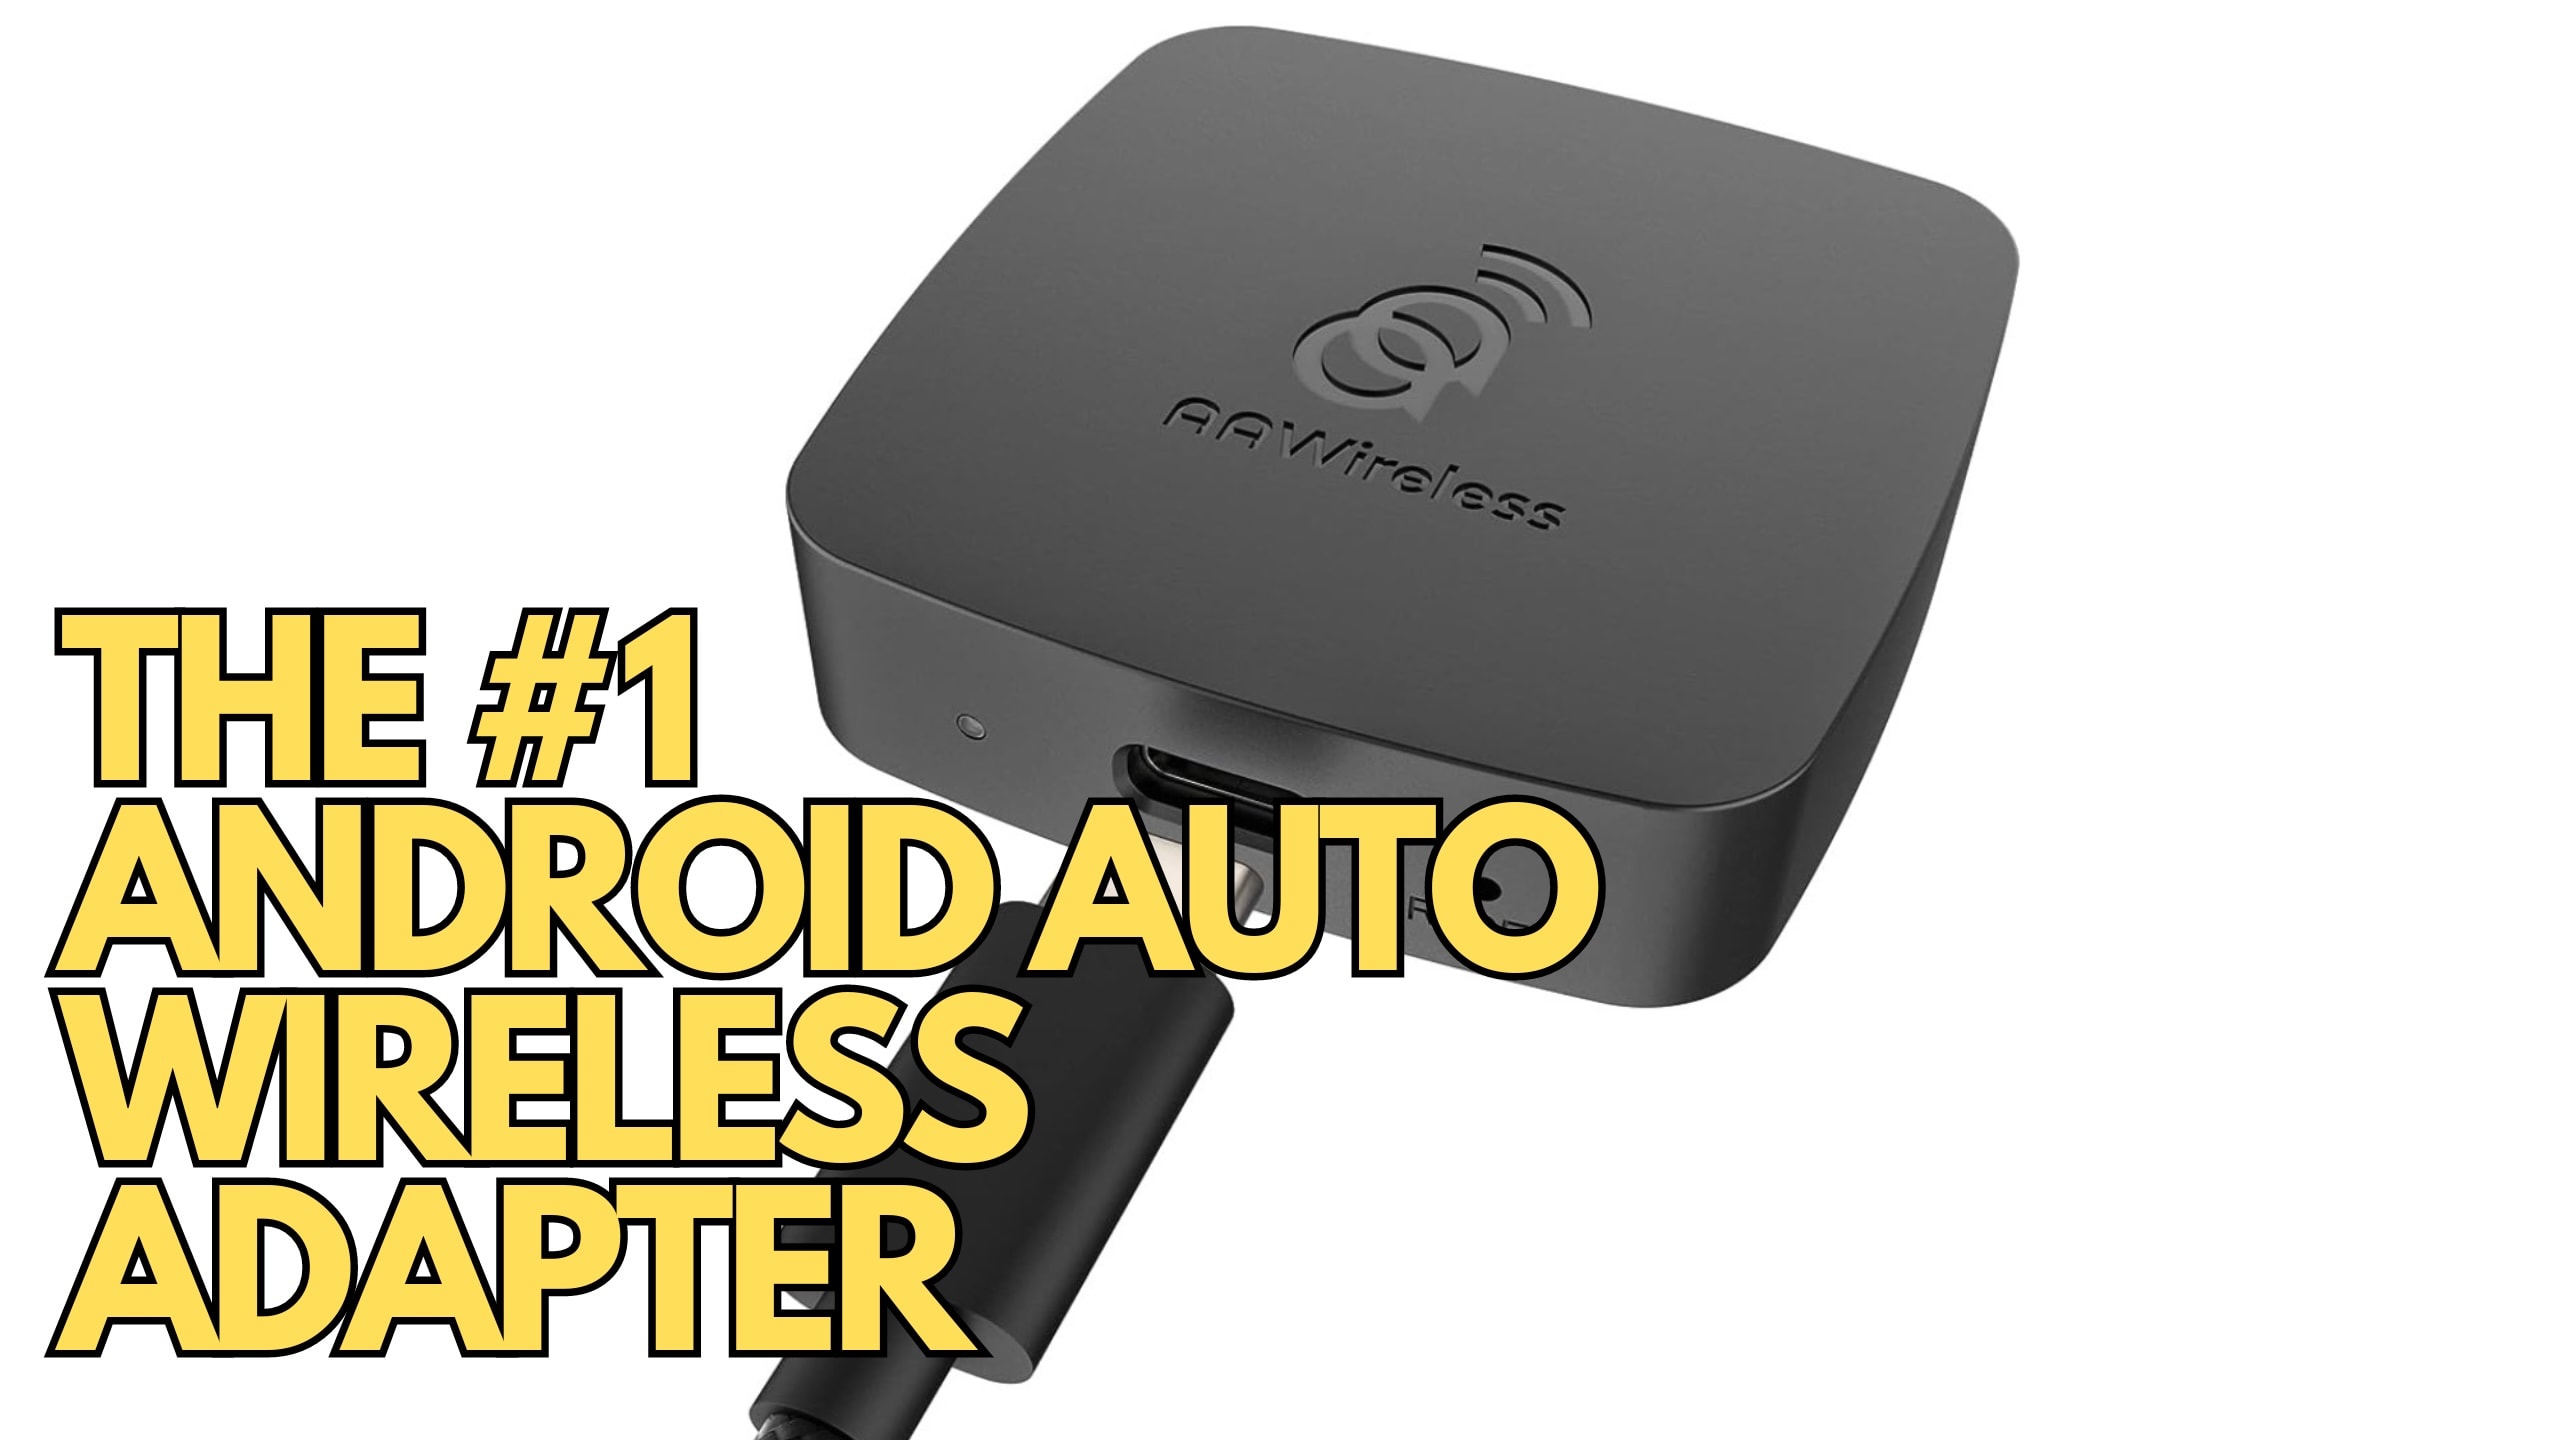 https://s1.cdn.autoevolution.com/images/news/the-world-s-top-android-auto-wireless-adapter-is-now-cheaper-222734_1.jpg